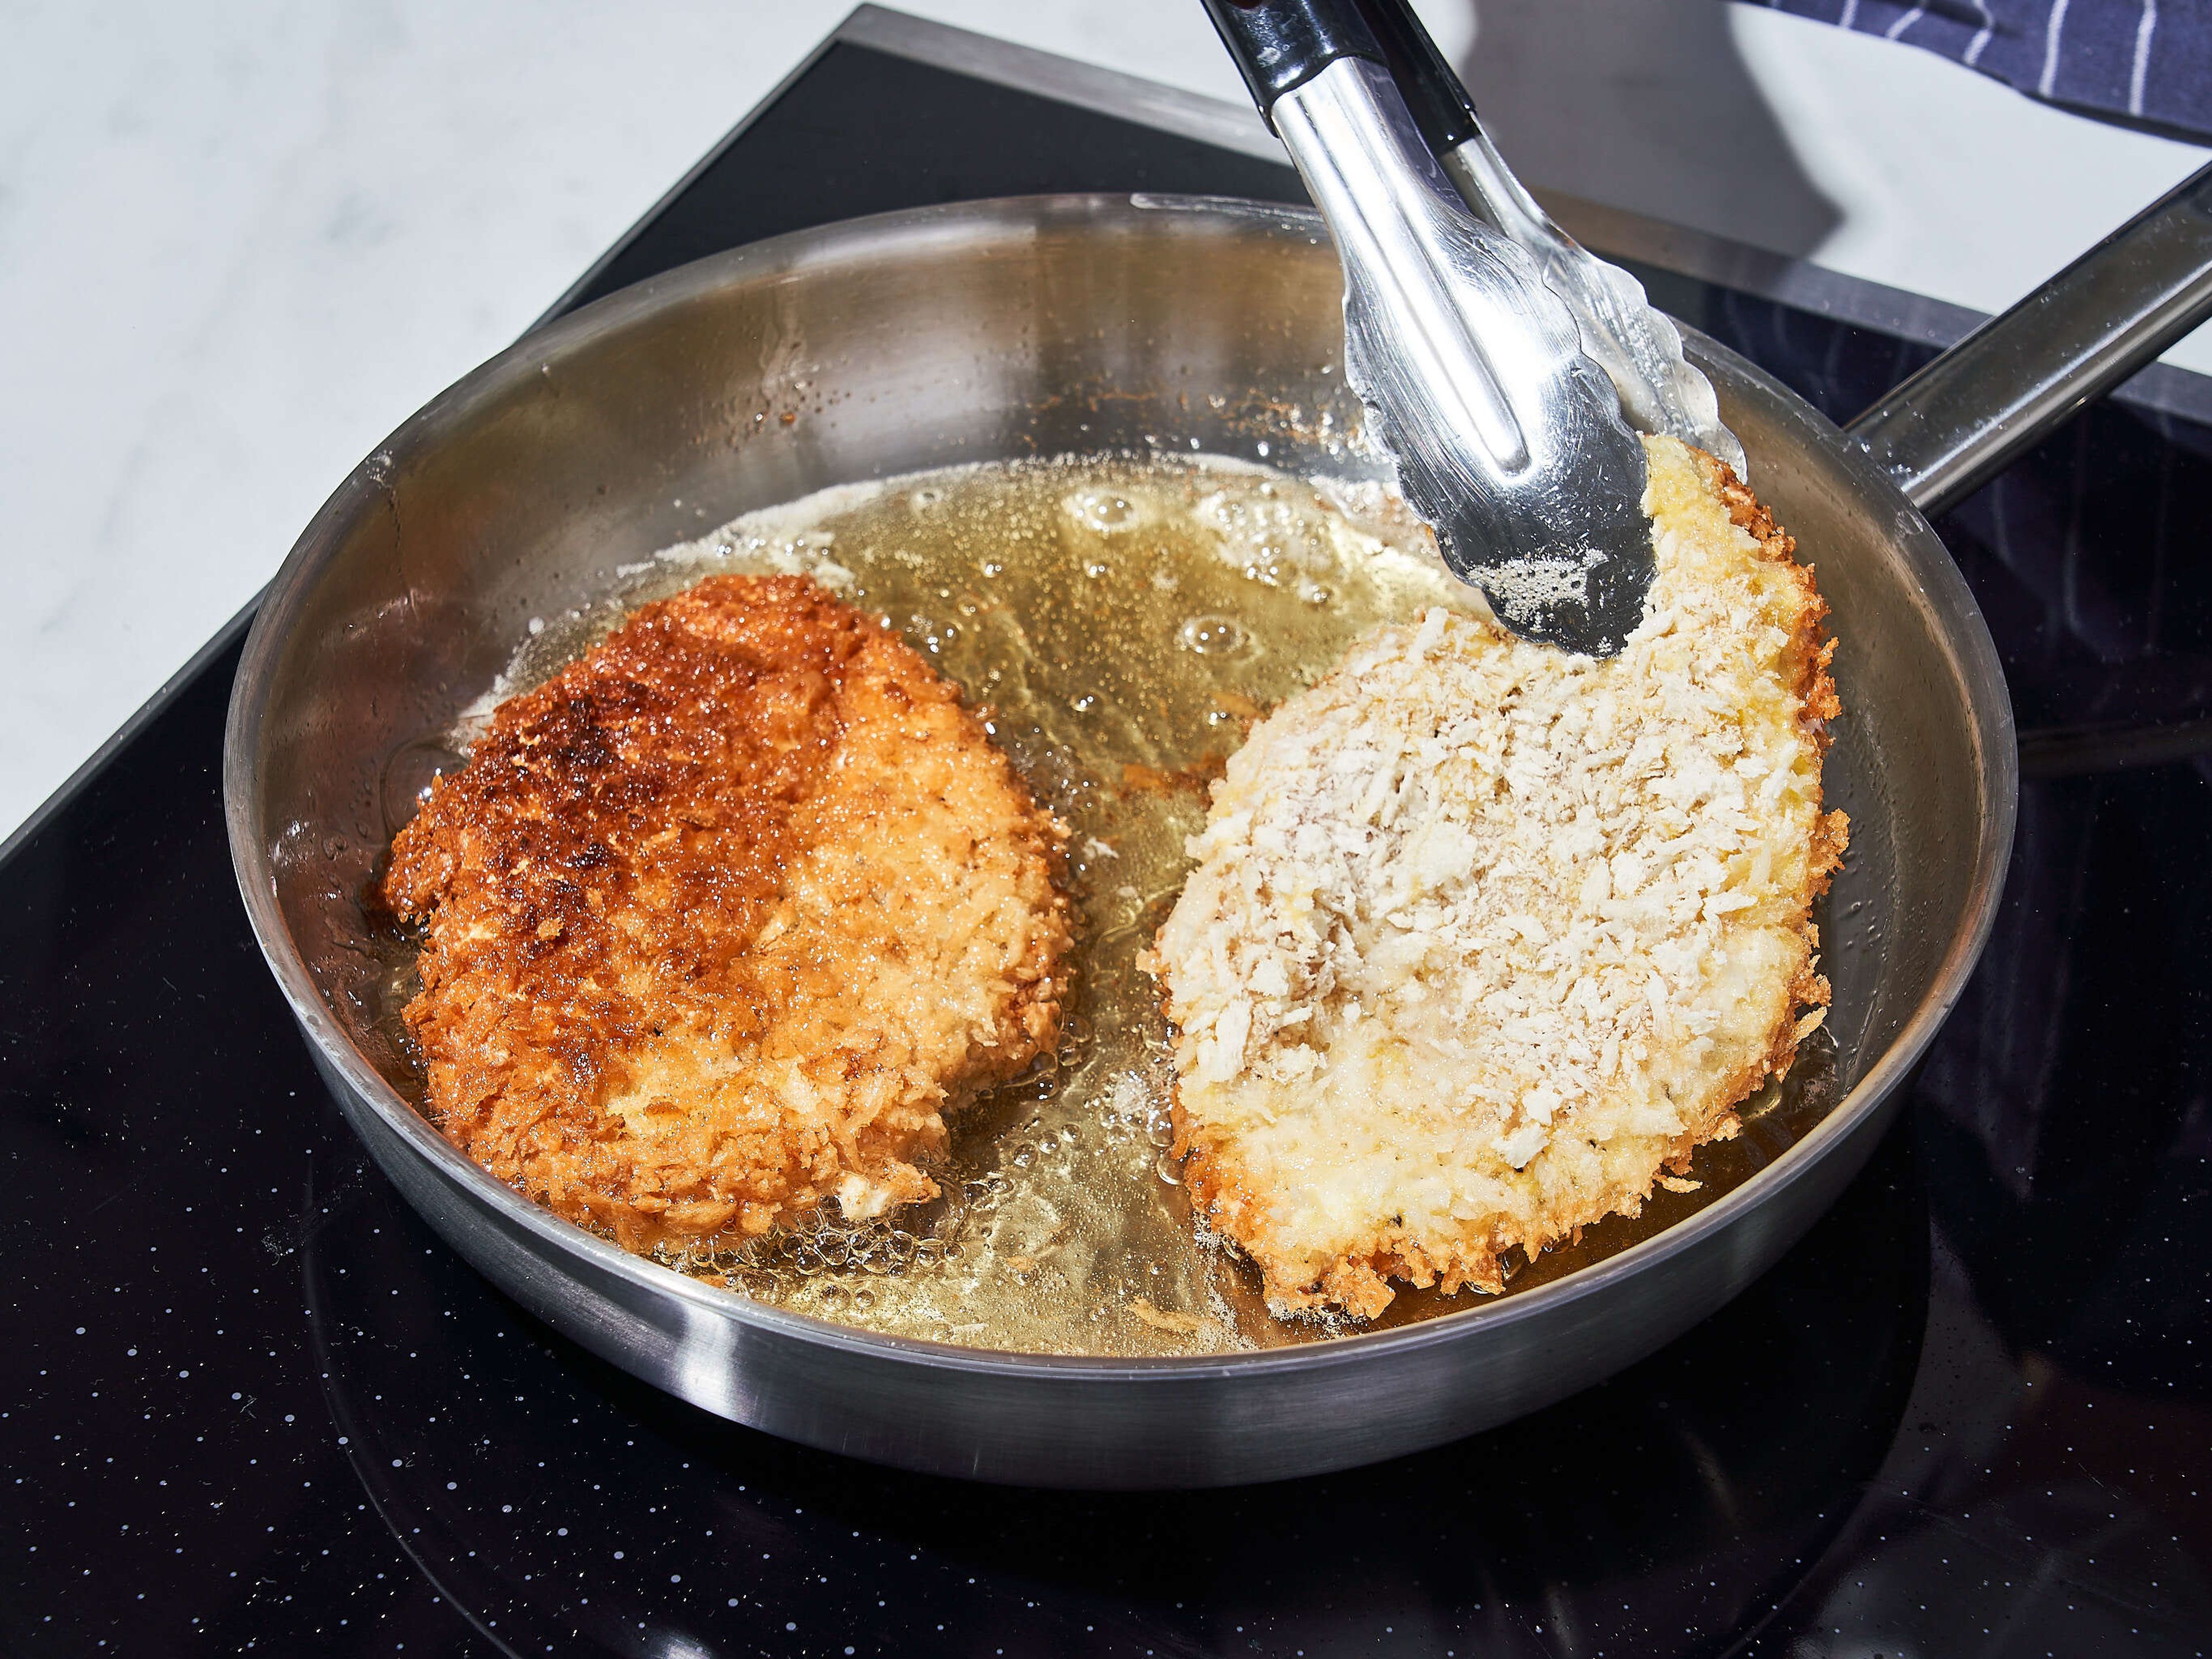 Add vegetable oil to a frying pan, set over medium heat. Whisk eggs in a rimmed plate or baking sheet and add remaining flour and panko breadcrumbs to two additional rimmed plates or baking sheets. Dredge the chicken breasts first in flour, then egg, and finally into the breadcrumbs. Shallow fry chicken breasts on each side for approx. 4 min., until golden brown and crispy. Serve with curry, cooked rice, and garnish with scallion, if desired. Enjoy!